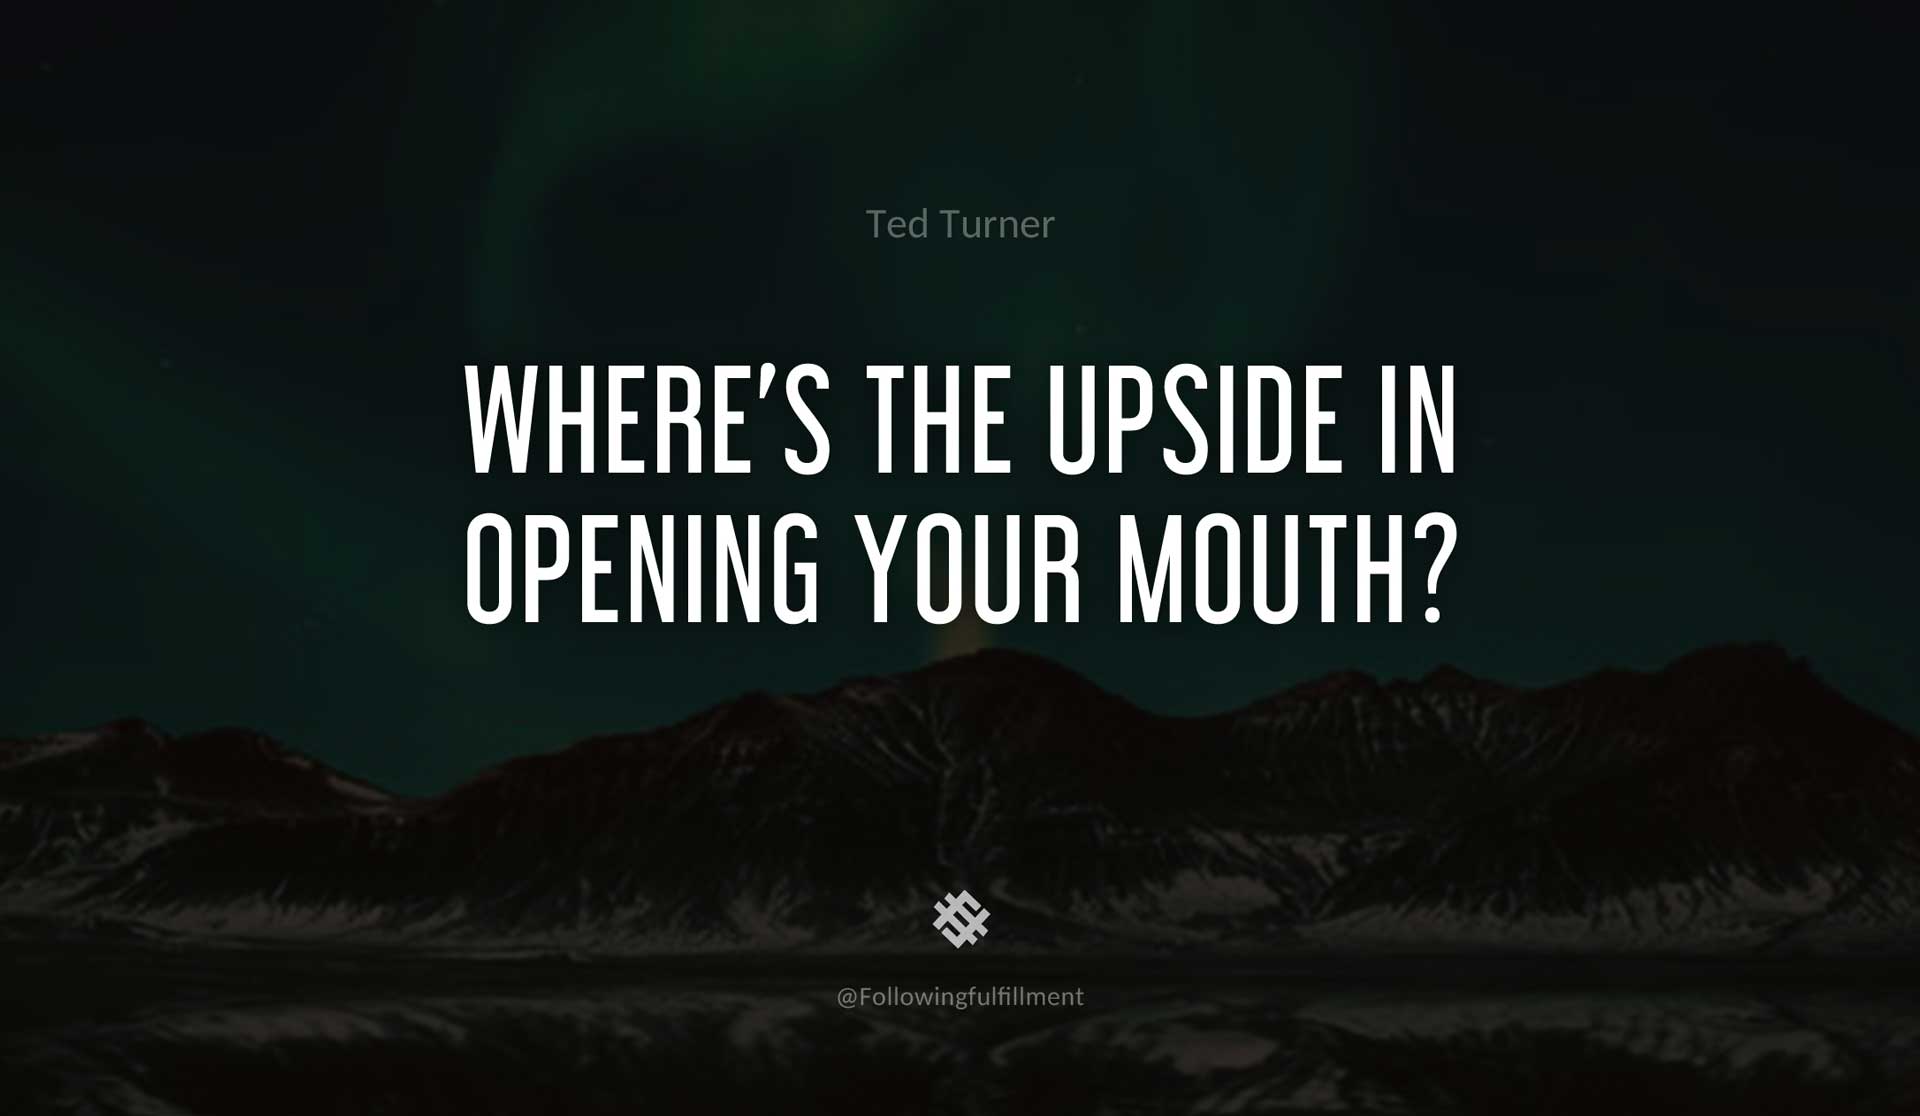 Where's-the-upside-in-opening-your-mouth--TED-TURNER-Quote.jpg